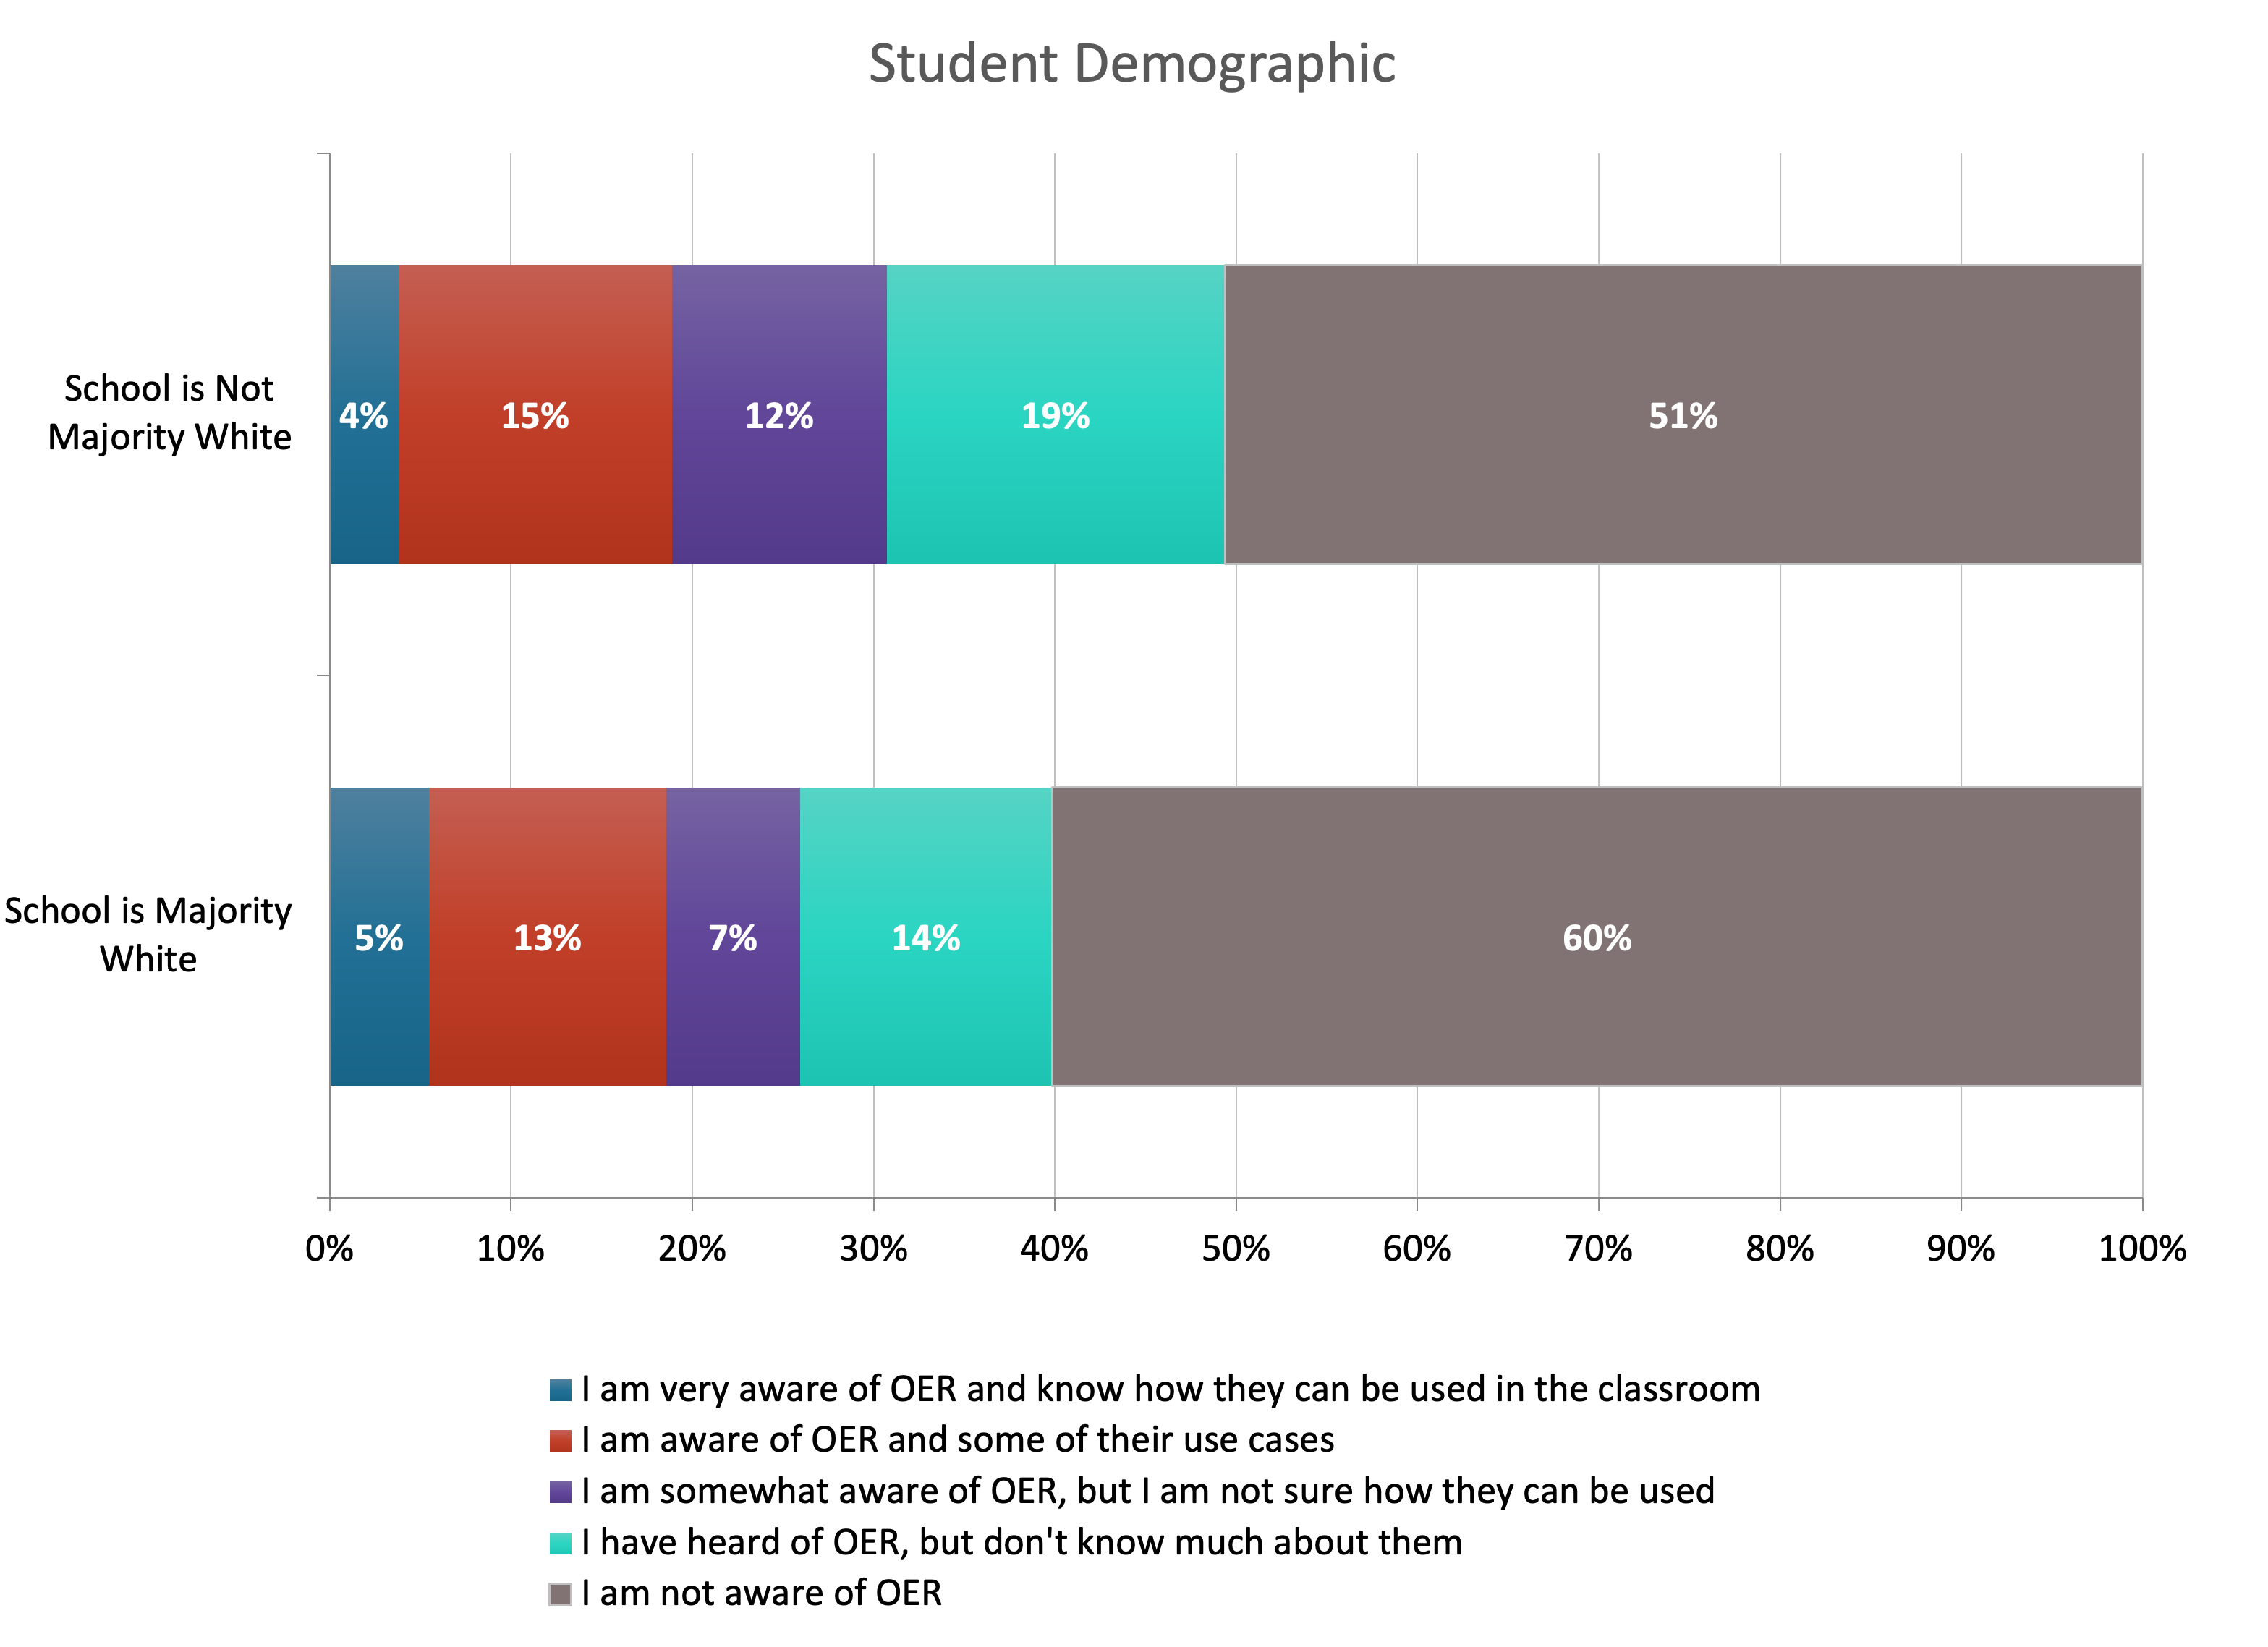 Differences by student demographics